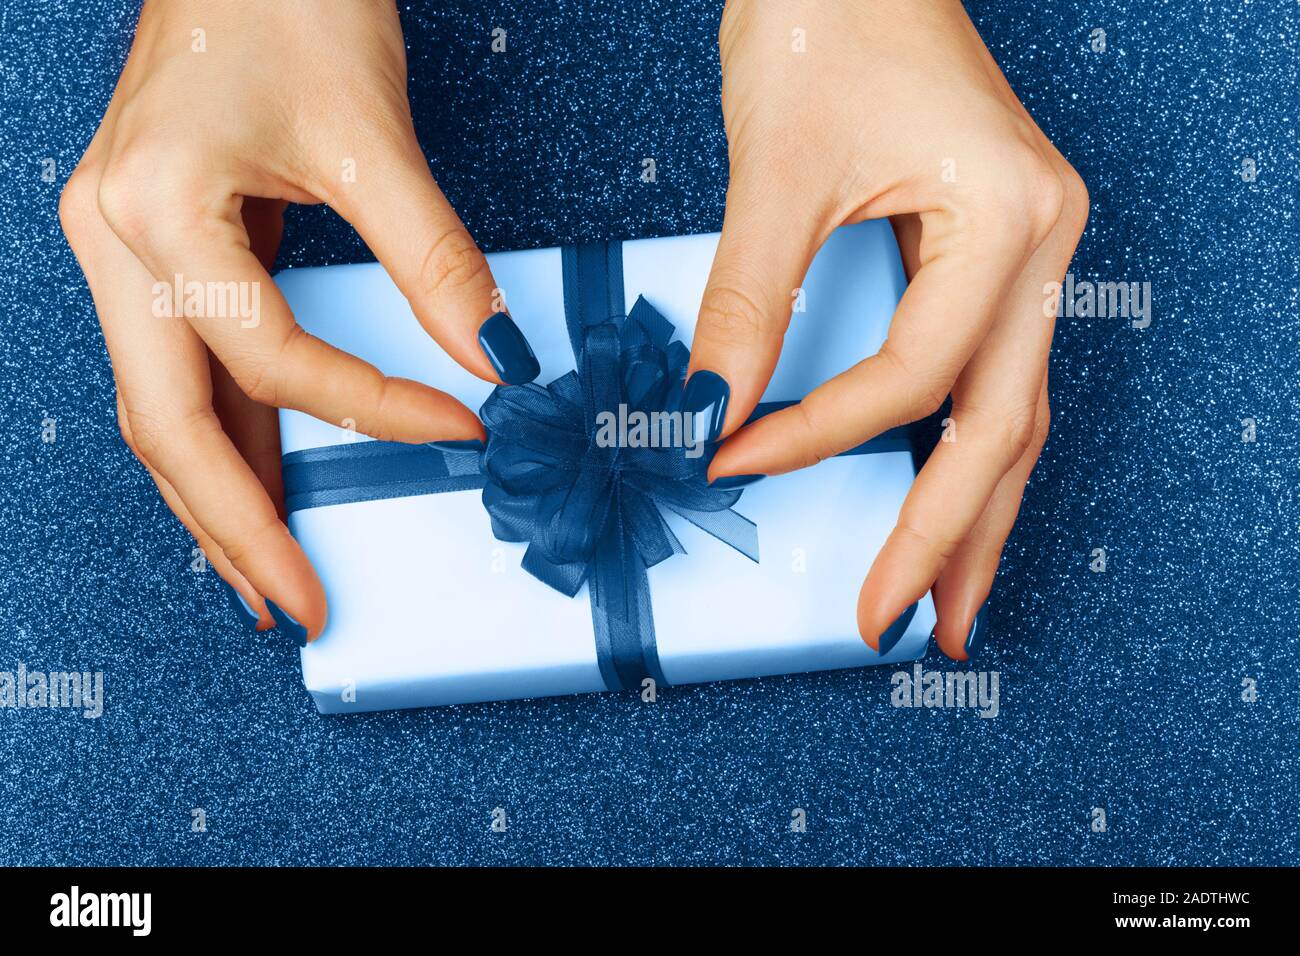 Beautiful female hands with a wrapped present on a brilliant festive blue background. Perfect manicure. Concept of the New Year, Christmas, Valentine's Day, gifts Stock Photo